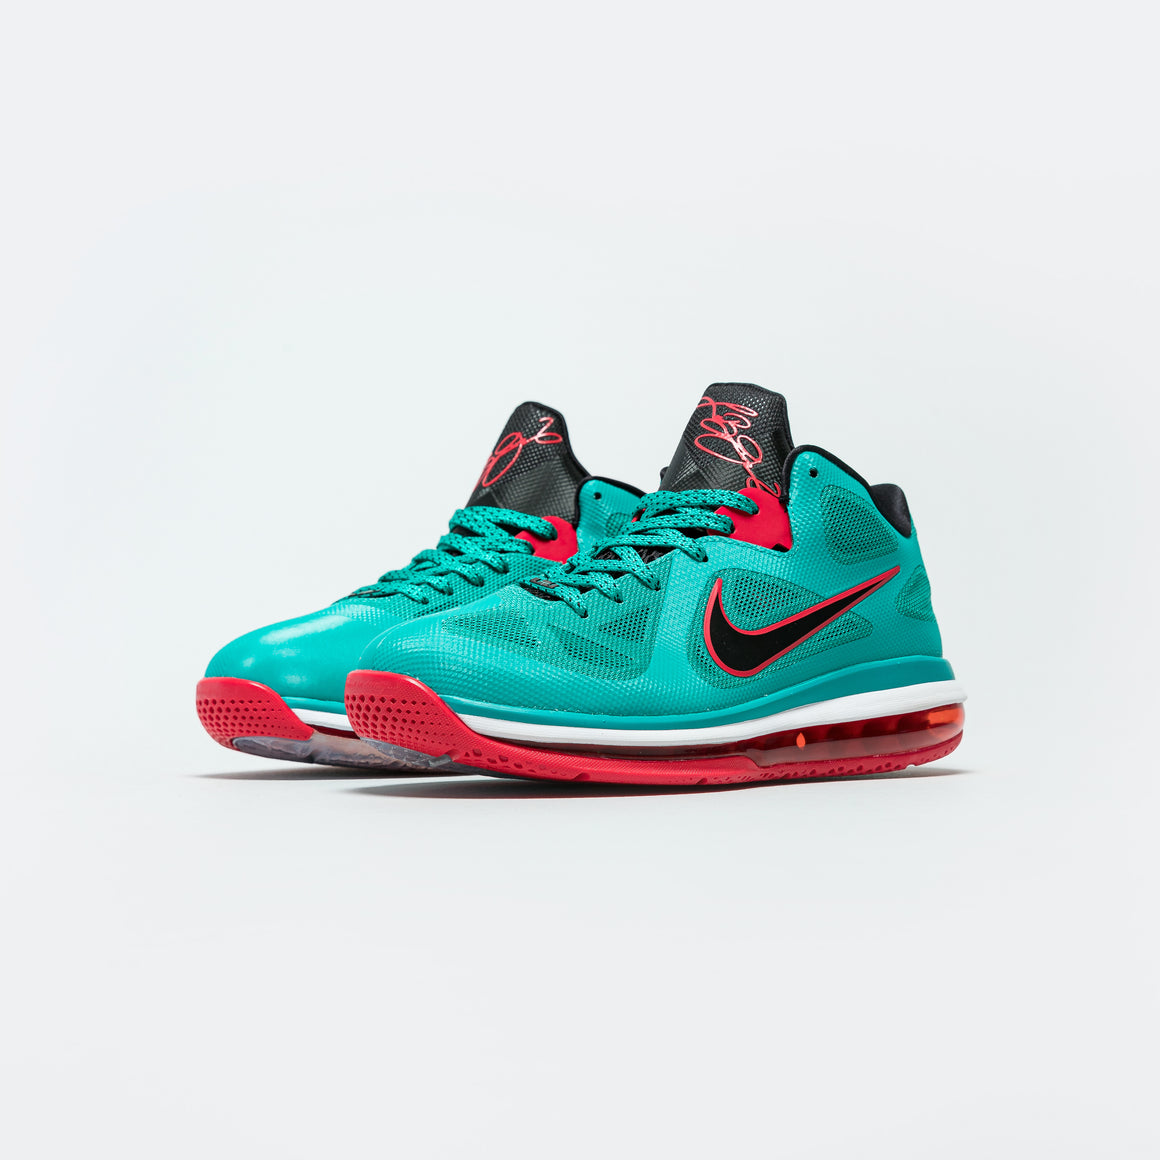 Nike - Lebron IX Low - New Green/Black-Action Red-White - UP THERE